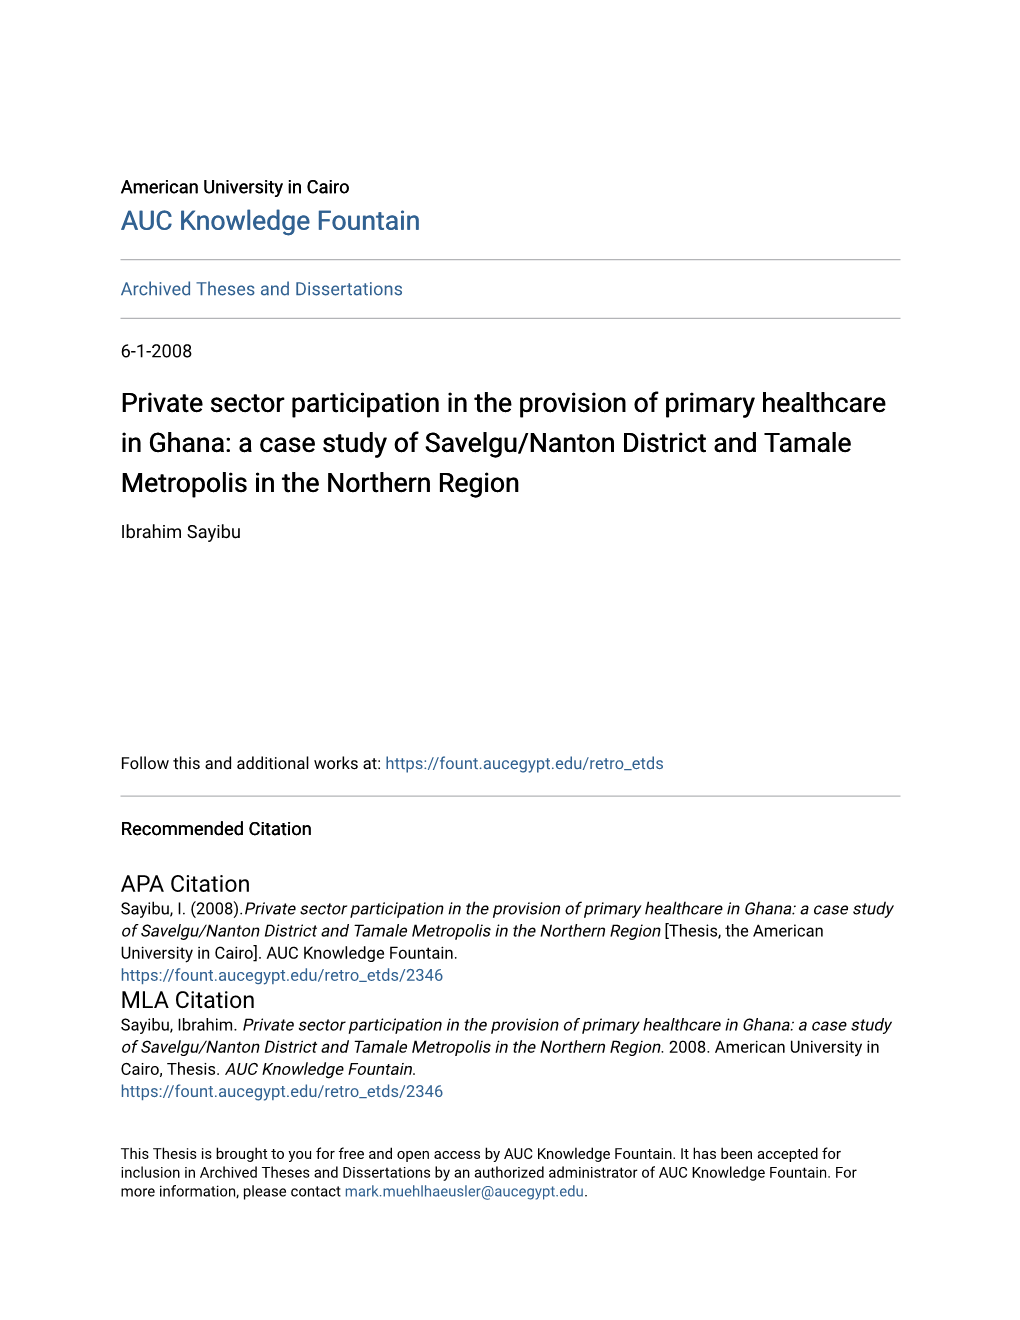 Private Sector Participation in the Provision of Primary Healthcare in Ghana: a Case Study of Savelgu/Nanton District and Tamale Metropolis in the Northern Region